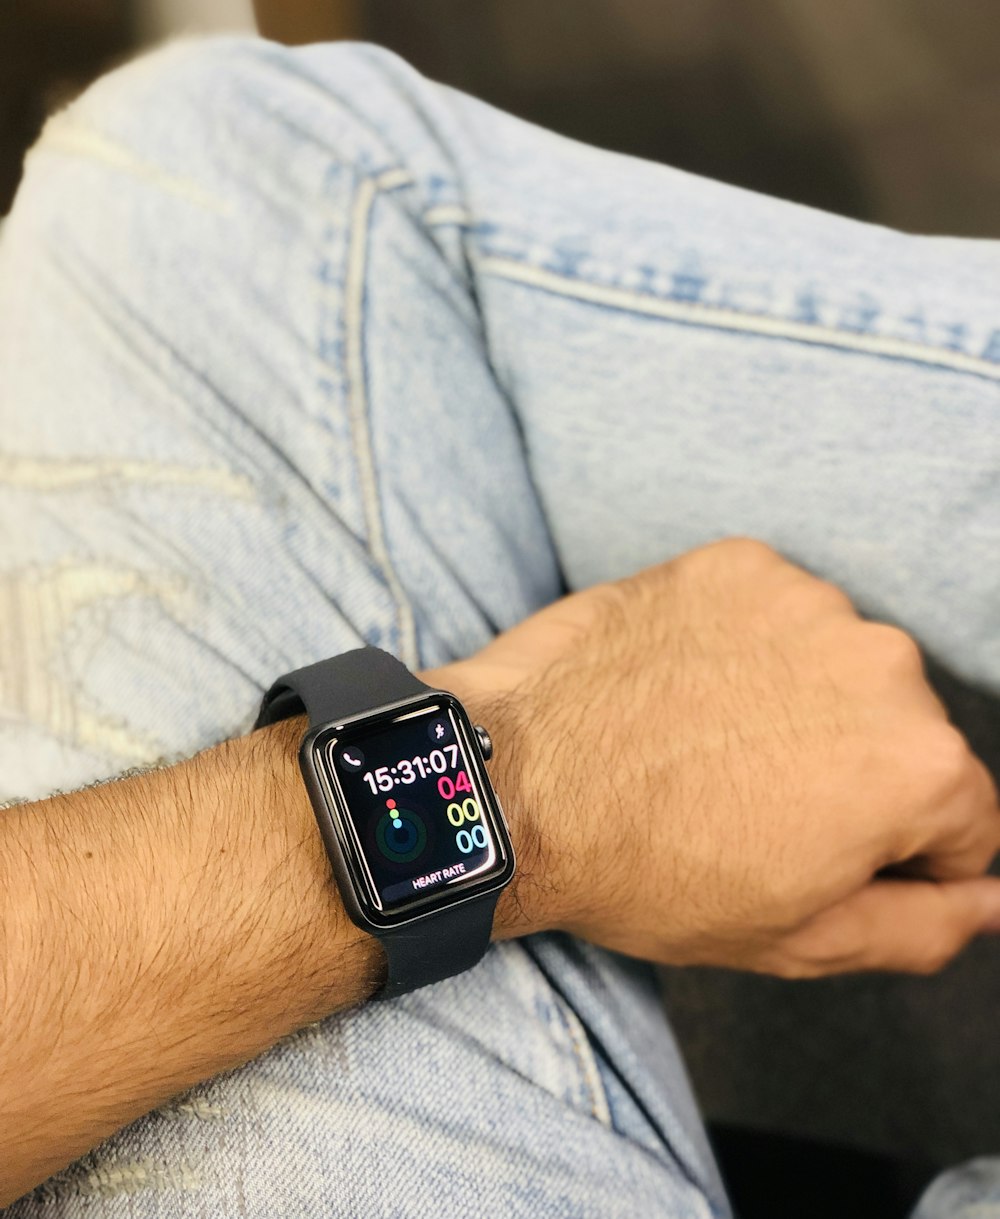 Person wearing silver aluminum case apple watch with black sport band photo  – Free Wrist Image on Unsplash